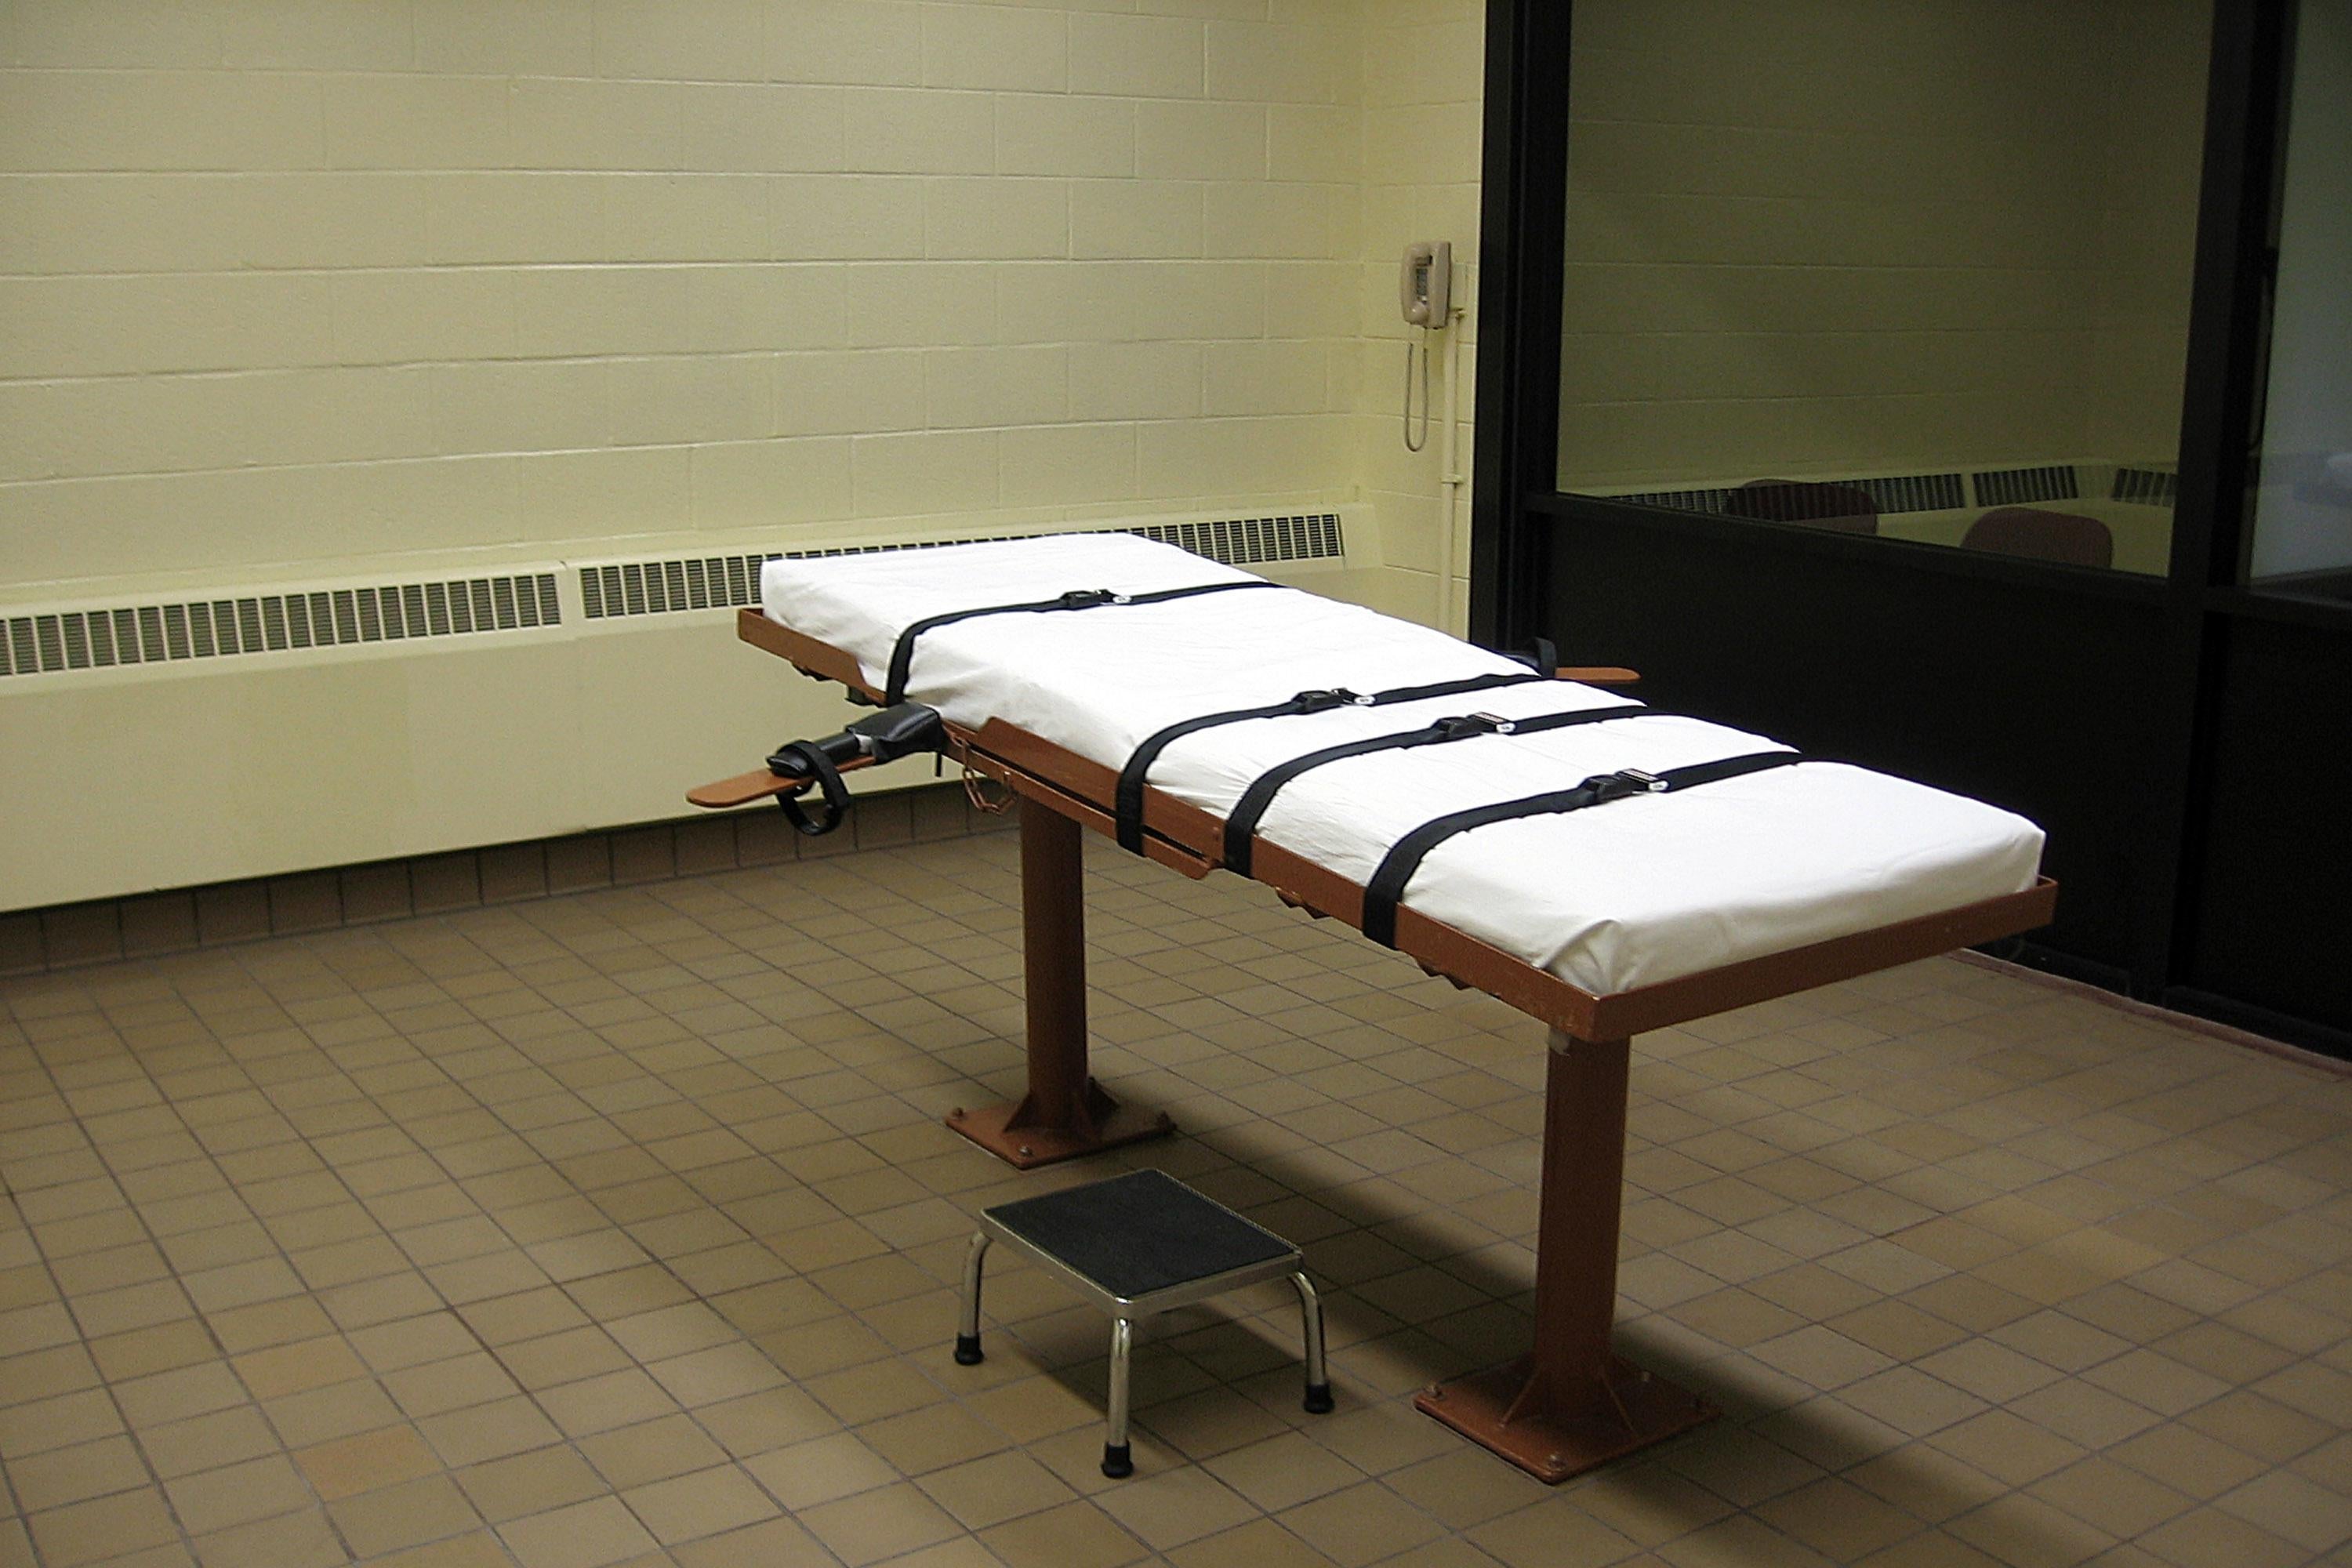 A cot with straps in an execution chamber.